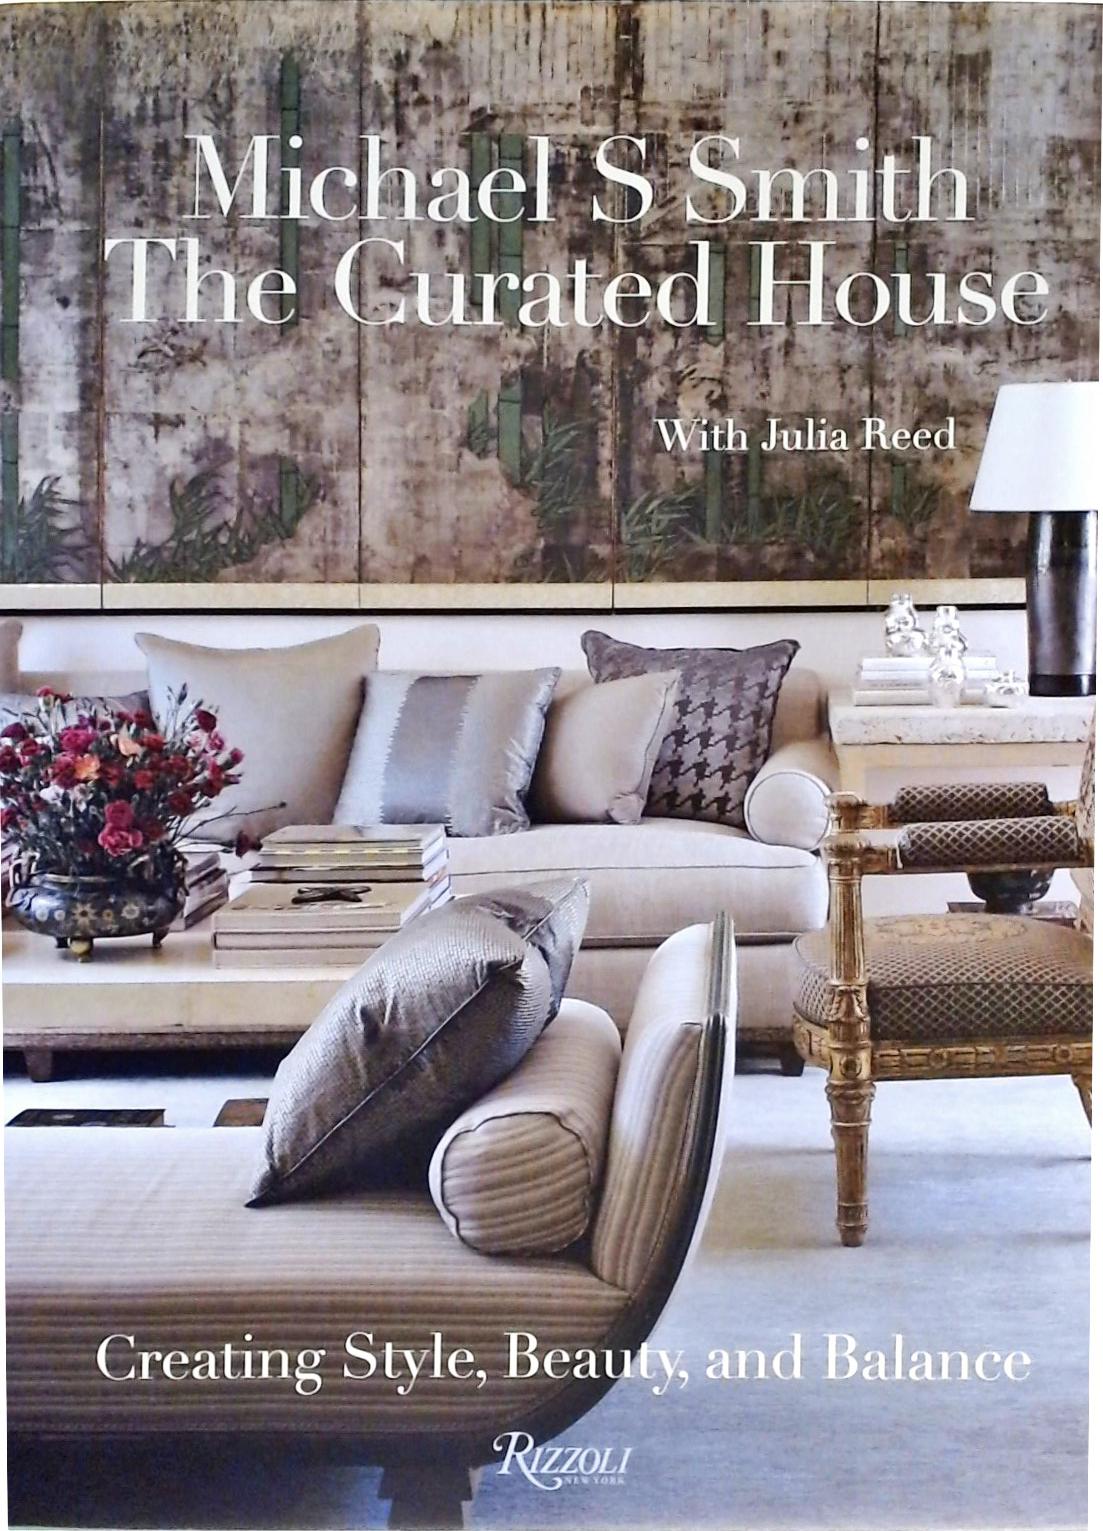 The Curated House - Creating Style, Beauty, and Balance